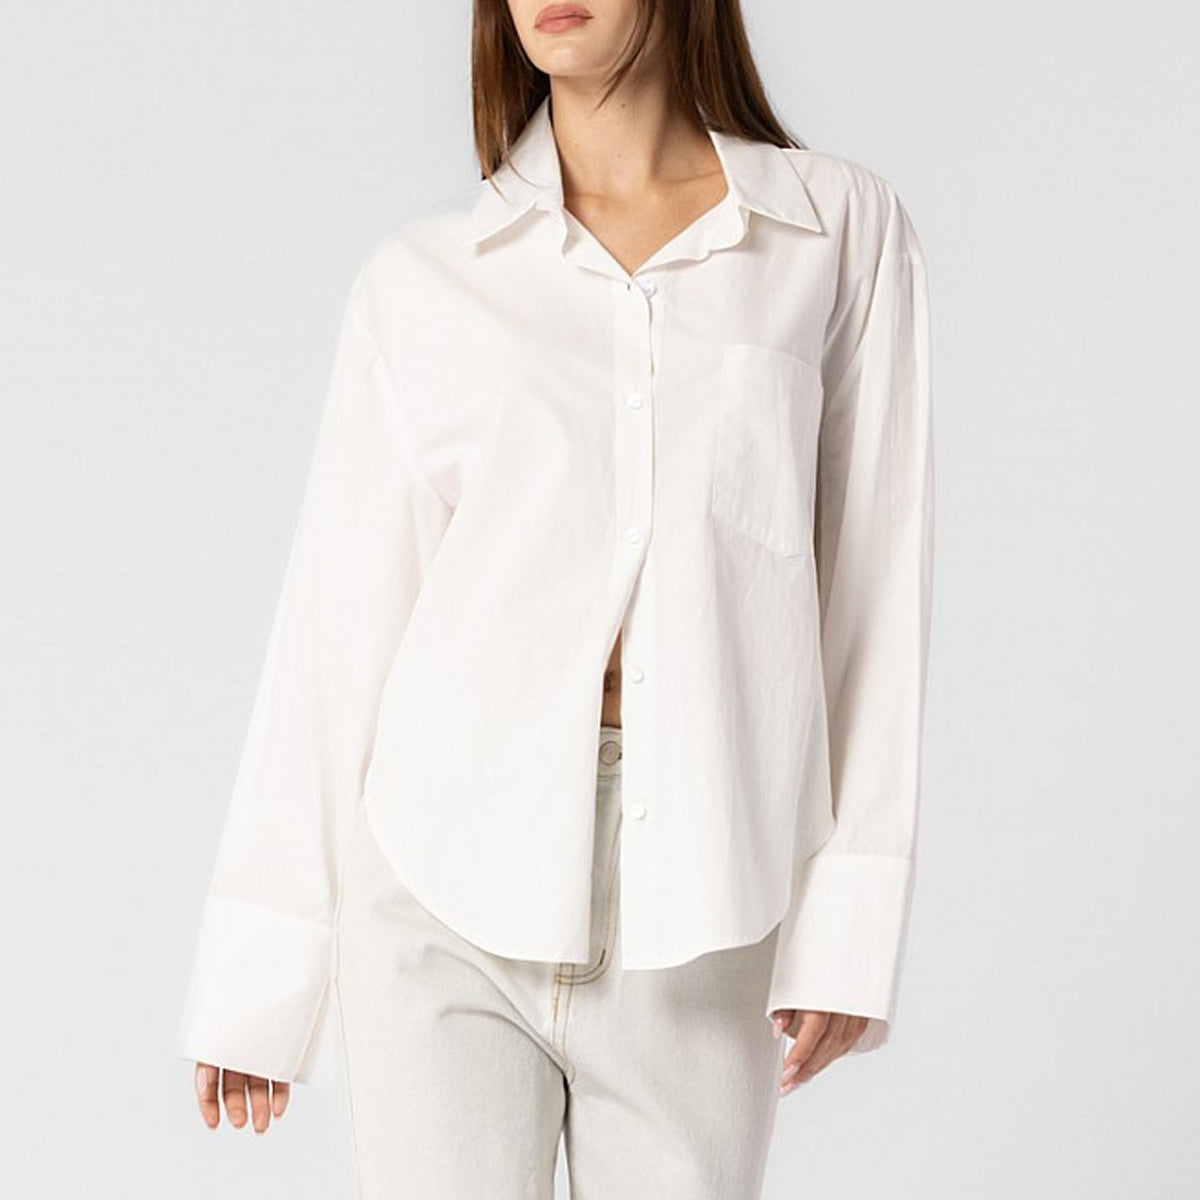 Close half body photo of model wearing the Oversized Button Down Shirt - White.